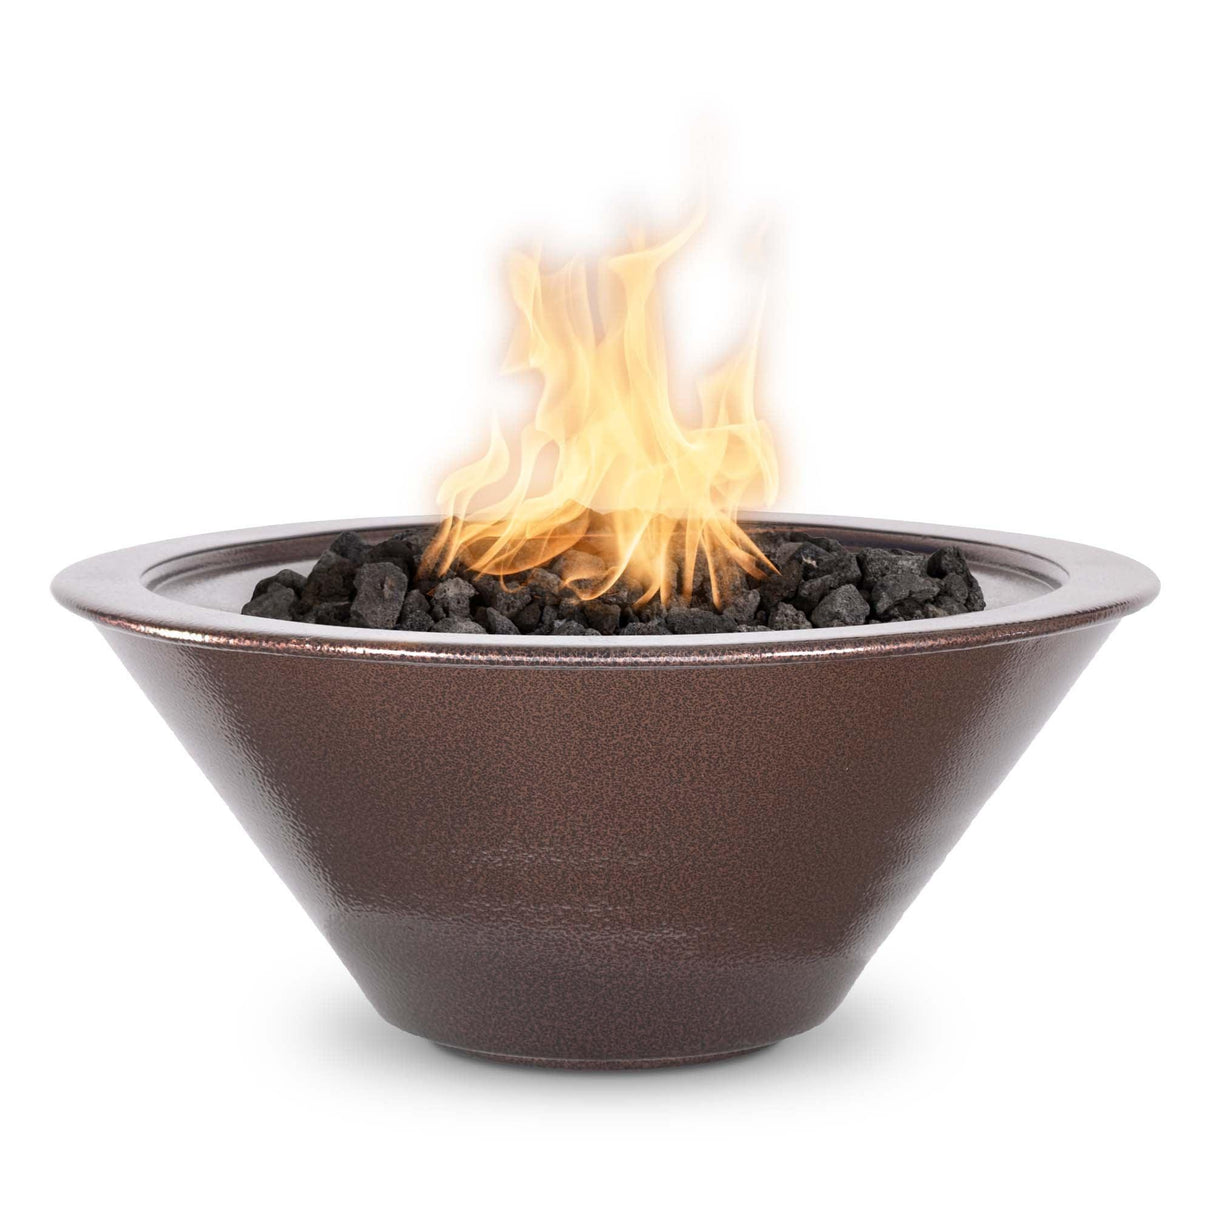 The Outdoor Plus Cazo Fire Bowl - Powder Coated Metal - 36"